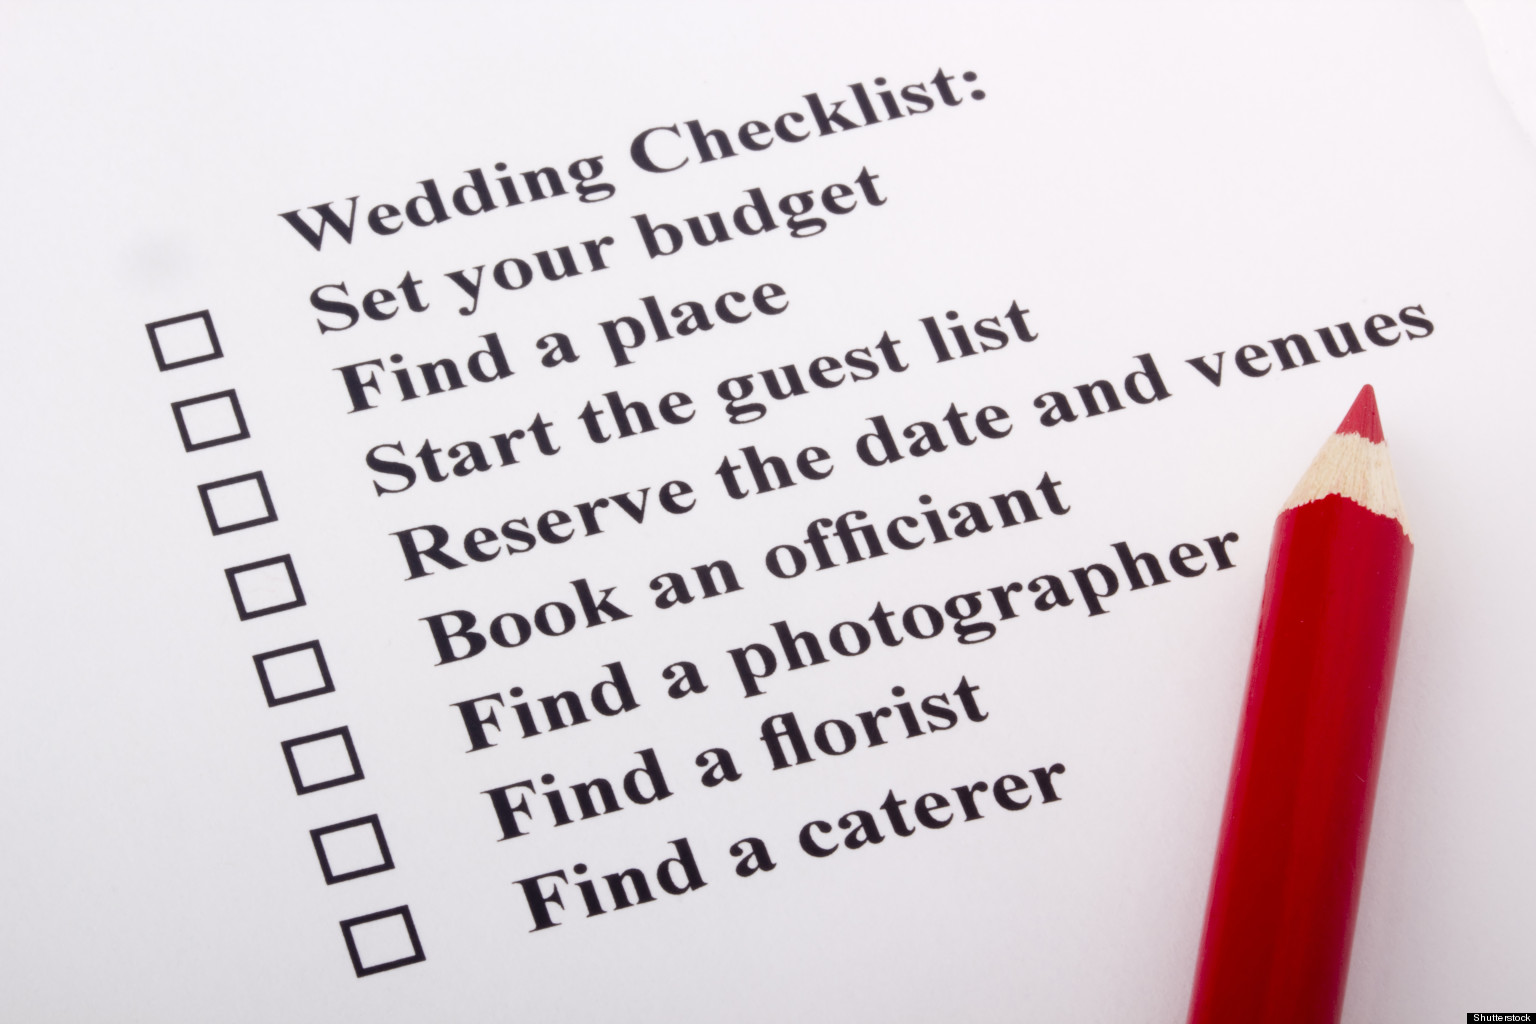 wedding-planning-advice-from-huffpost-readers-huffpost